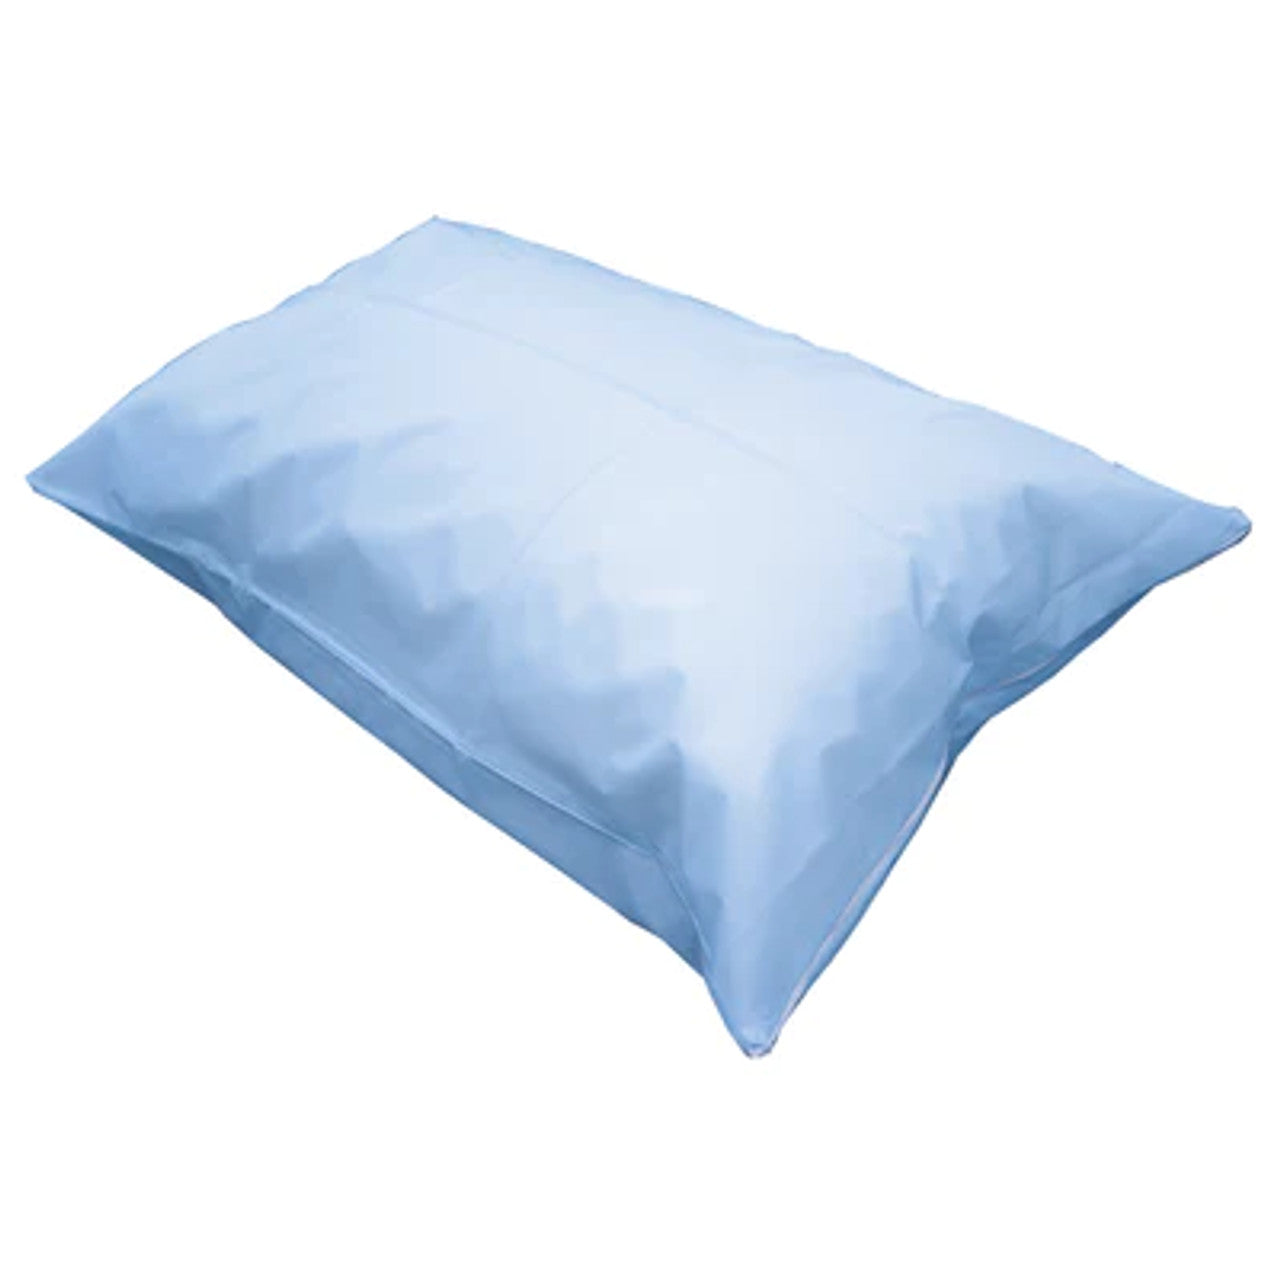 PVC Mackintosh Pillow Cases - Lightweight PVC with Zip (Box of 100)